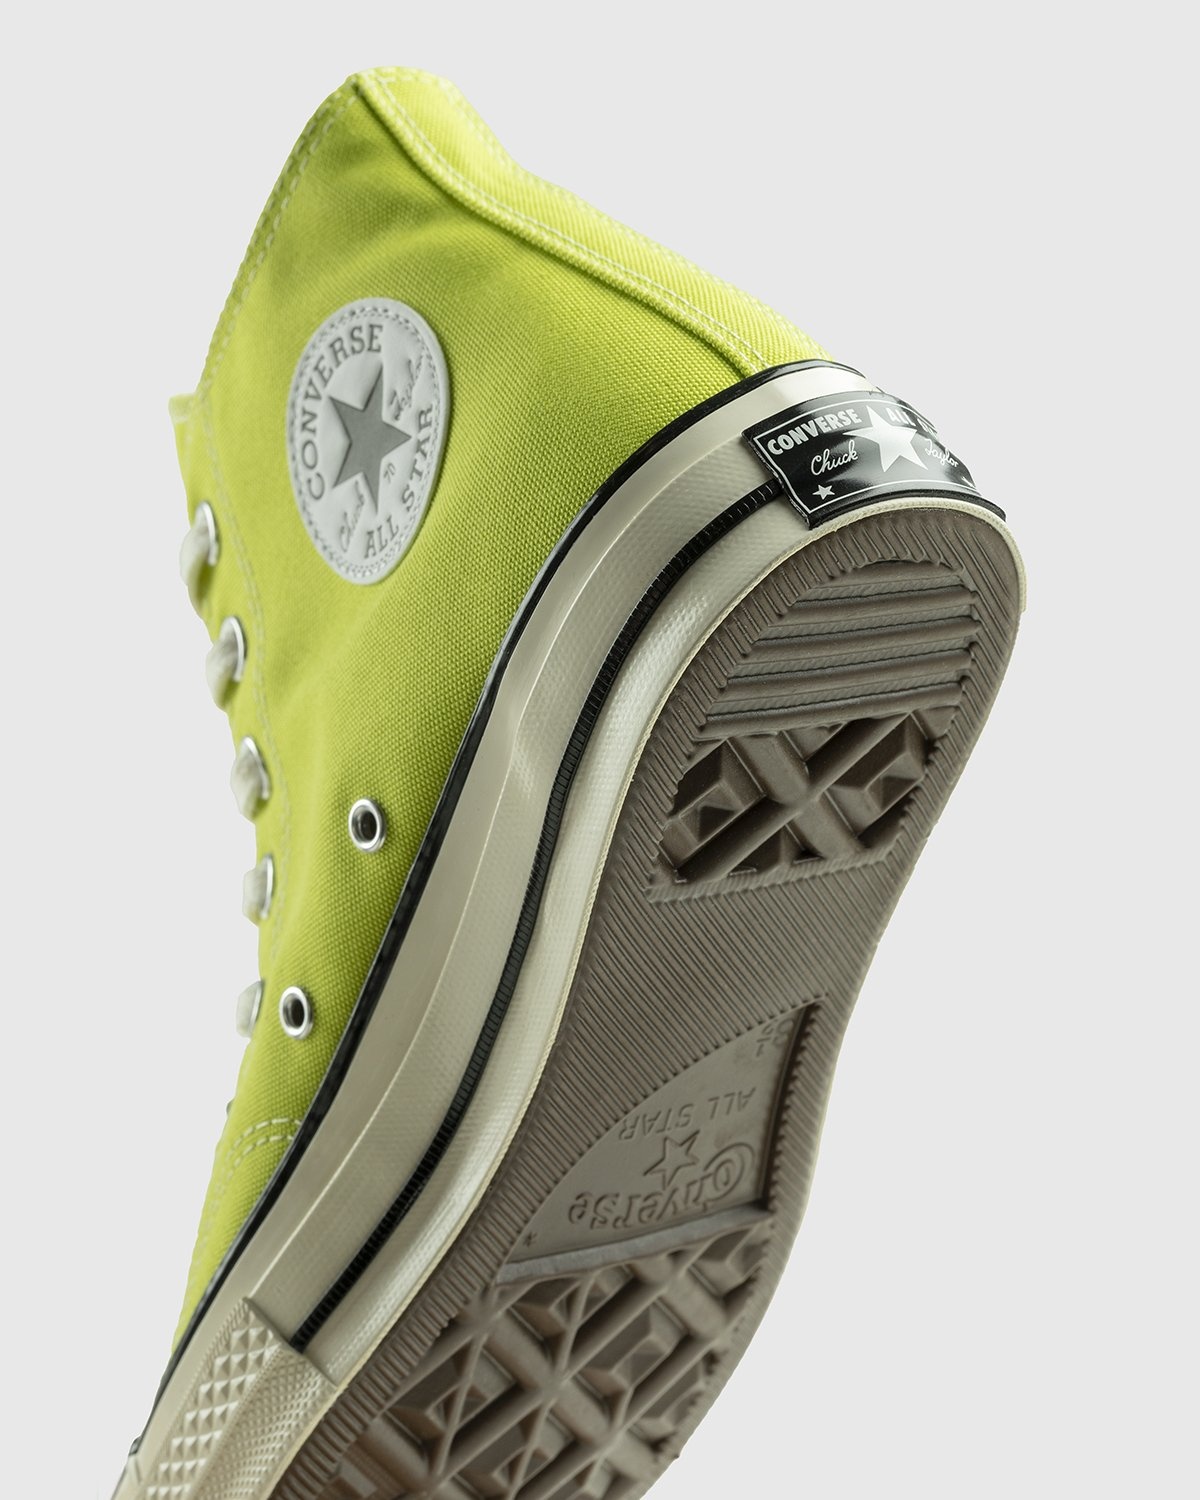 Converse – Chuck 70 Lime Twist Egret Black - High Top Sneakers - Yellow - Image 5